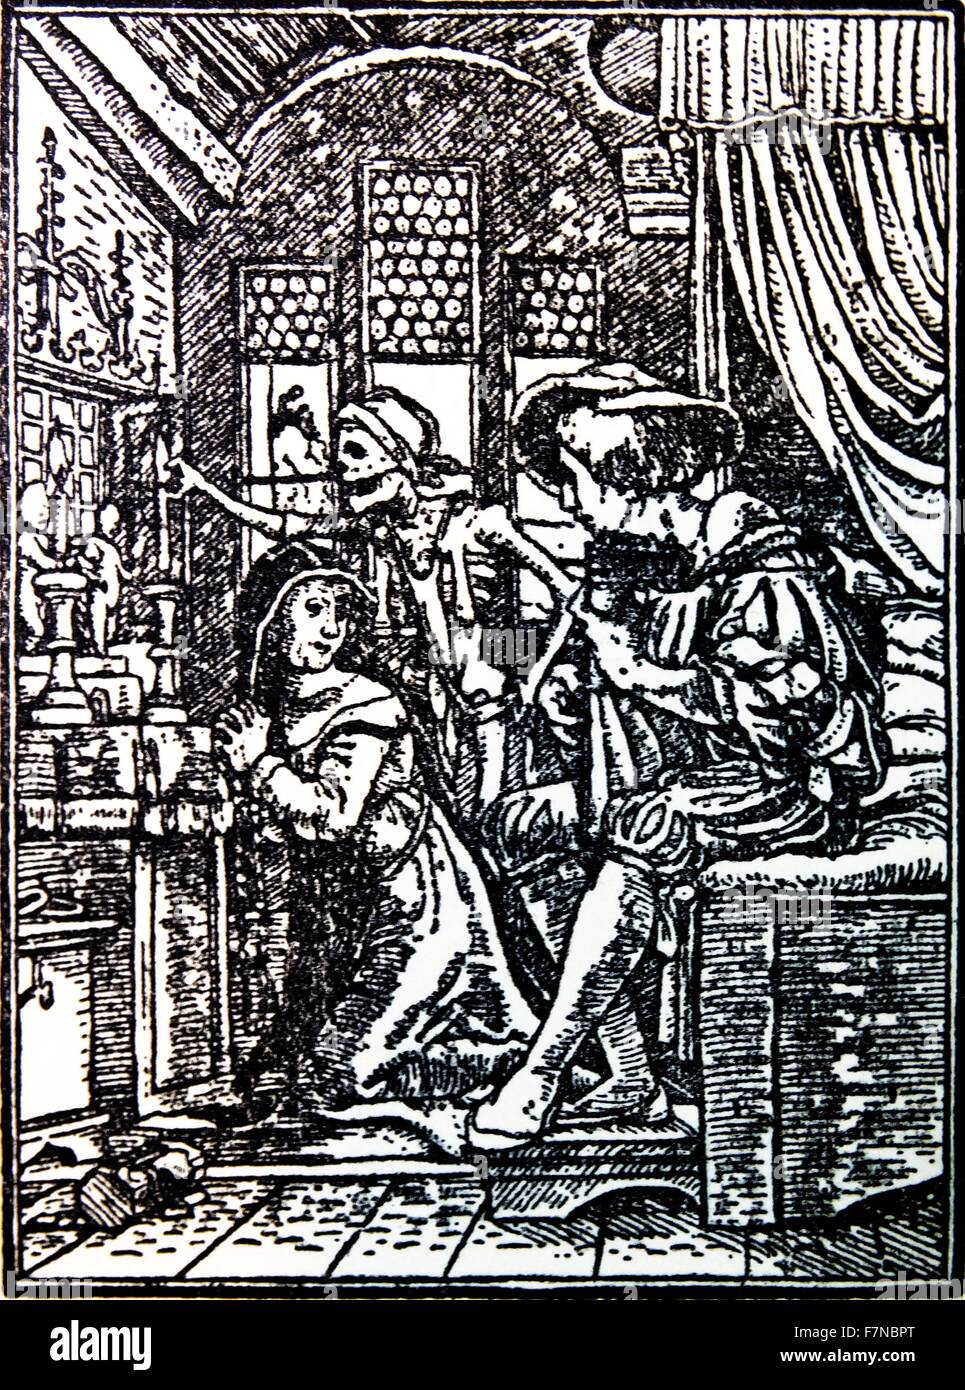 Hans holbein the younger: Totentanzfolge Series from a dance with death 1523 Stock Photo